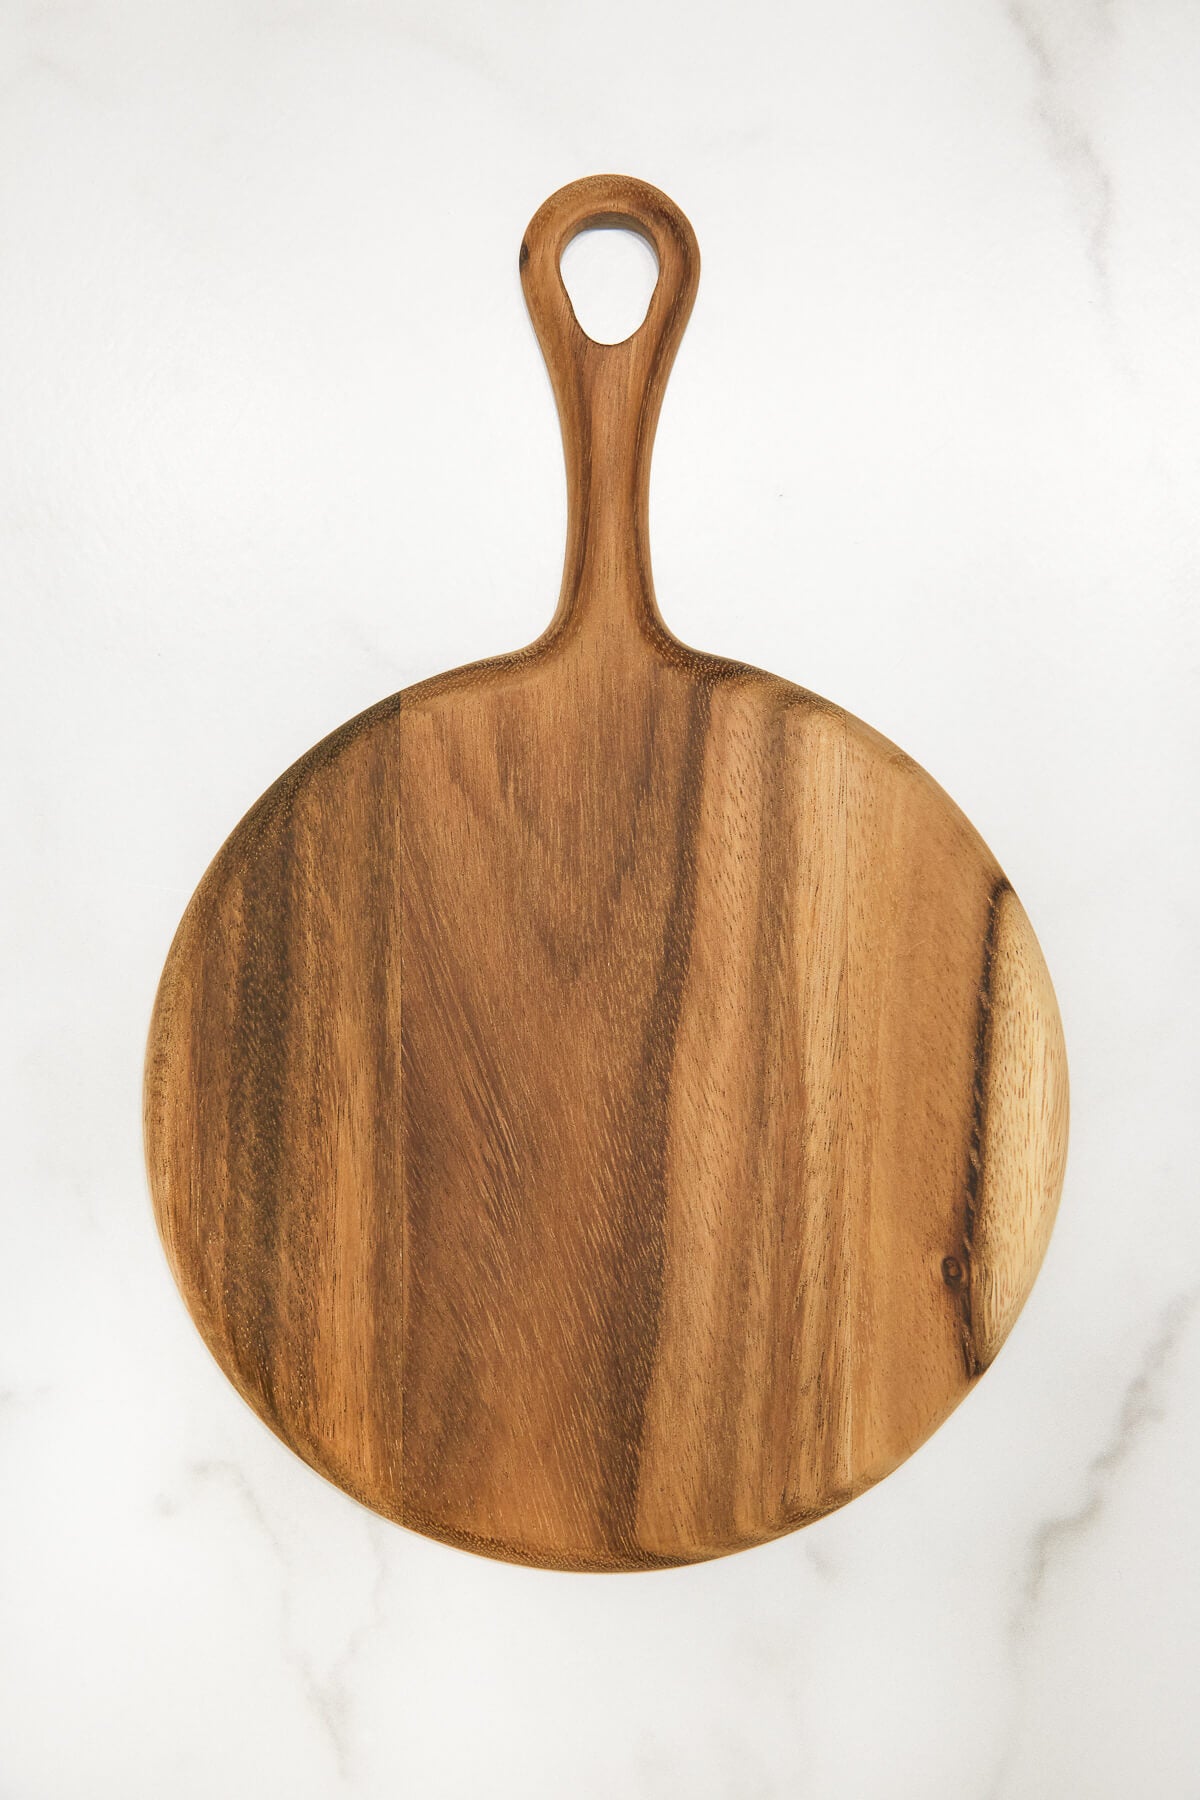 Be Home Acacia Round Board with Short Handle